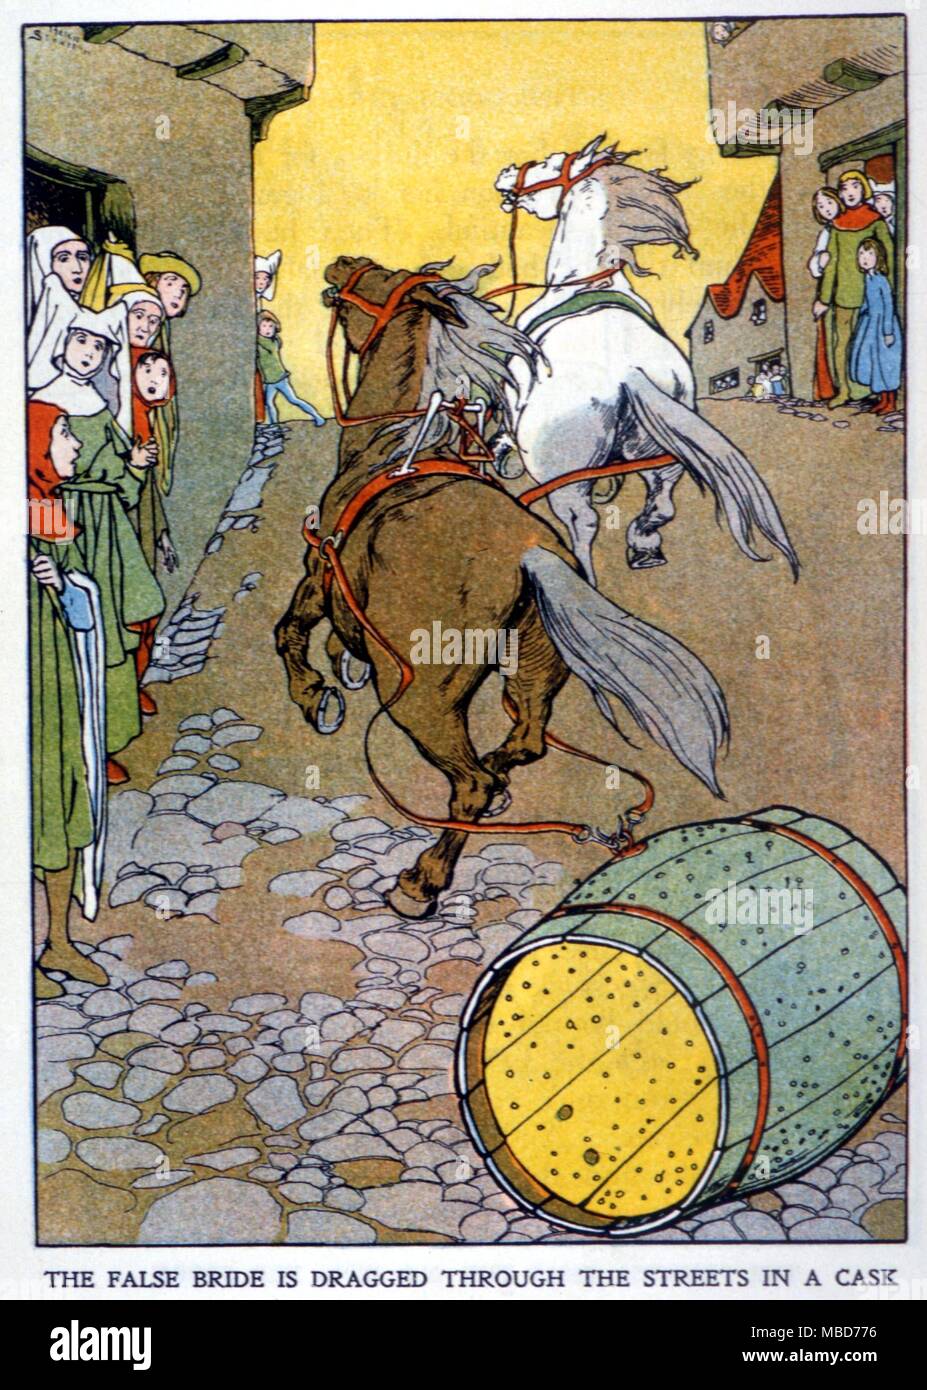 Fairy stories - The Goose-Girl - The False Bride dragged through the streets in a cask. From The Little Goose-Girl from Cherryblossom and other stories from Grimm 1909 - illustrated by Helen Stratton Stock Photo